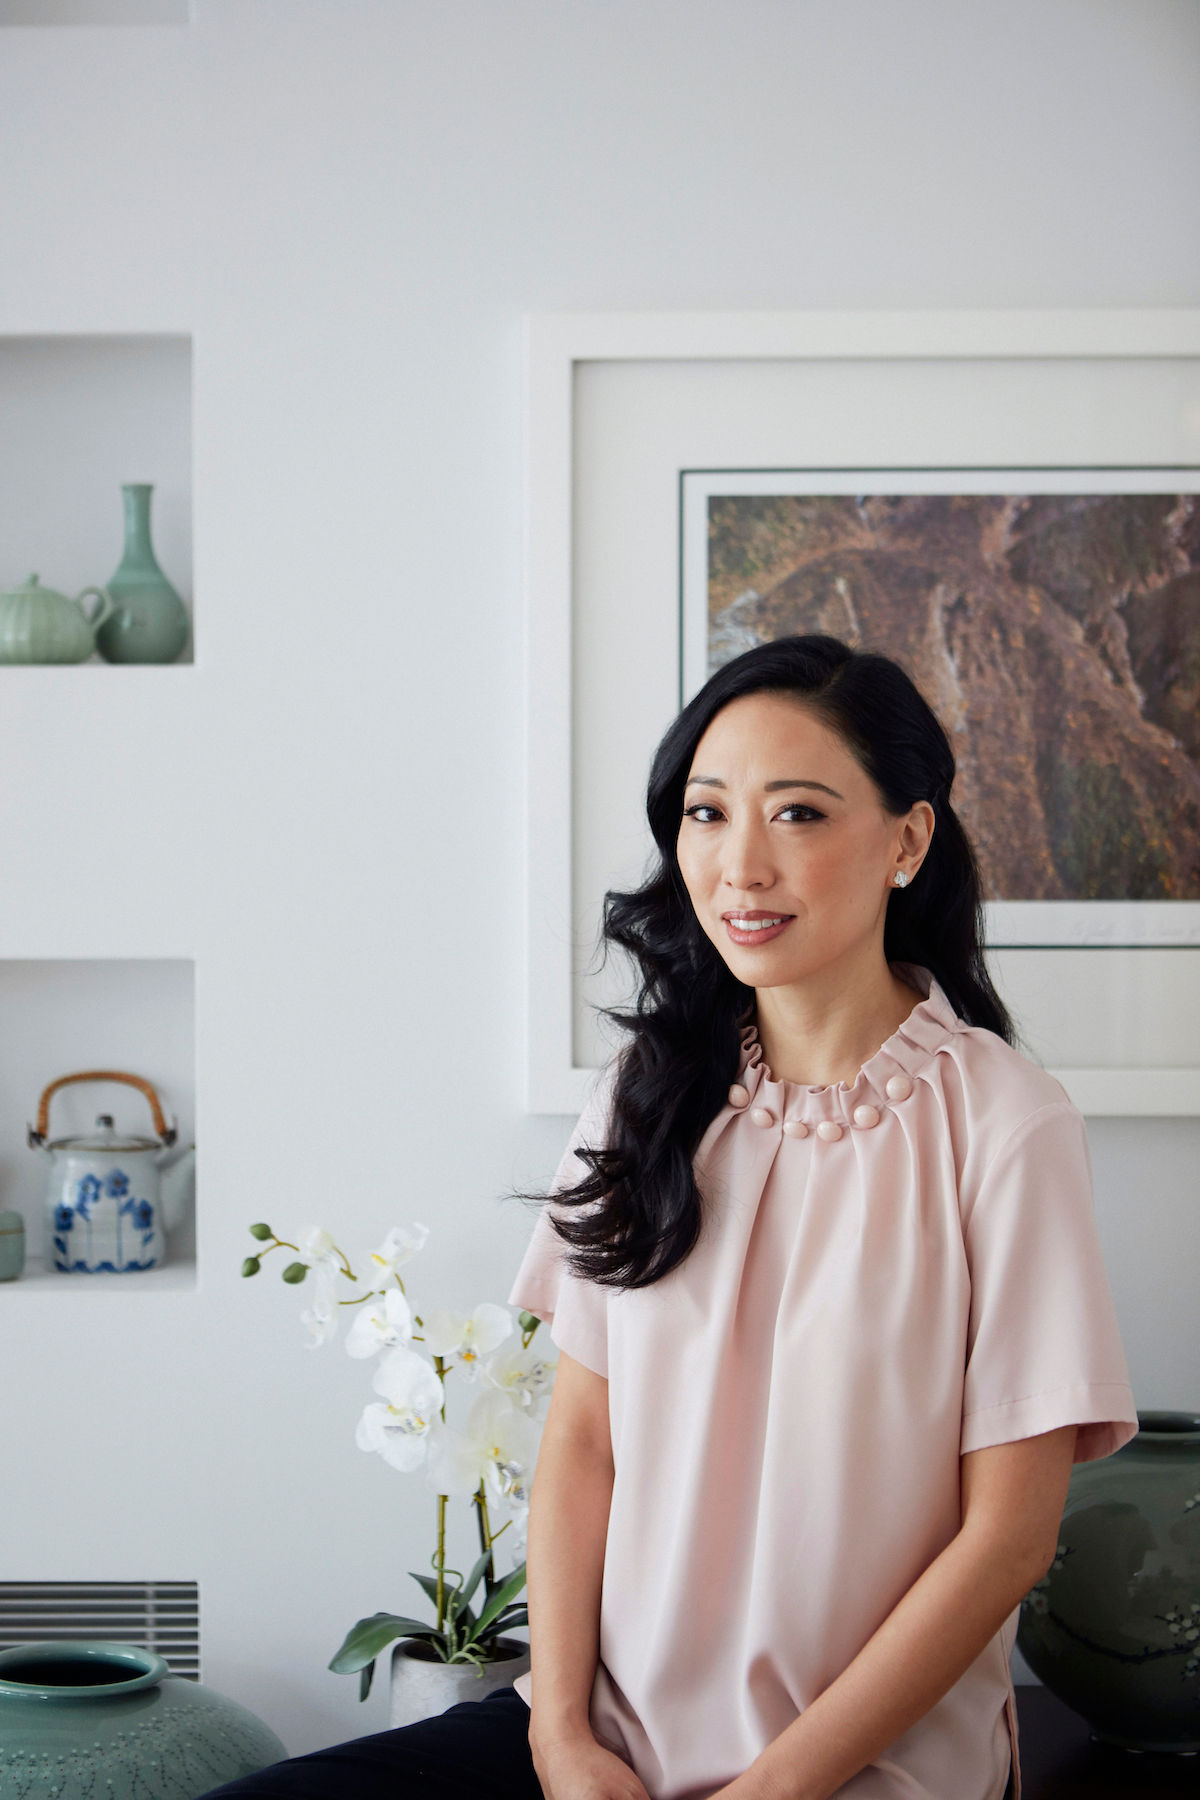 Korean American Chef Judy Joo on Culture and the Art of Hosting